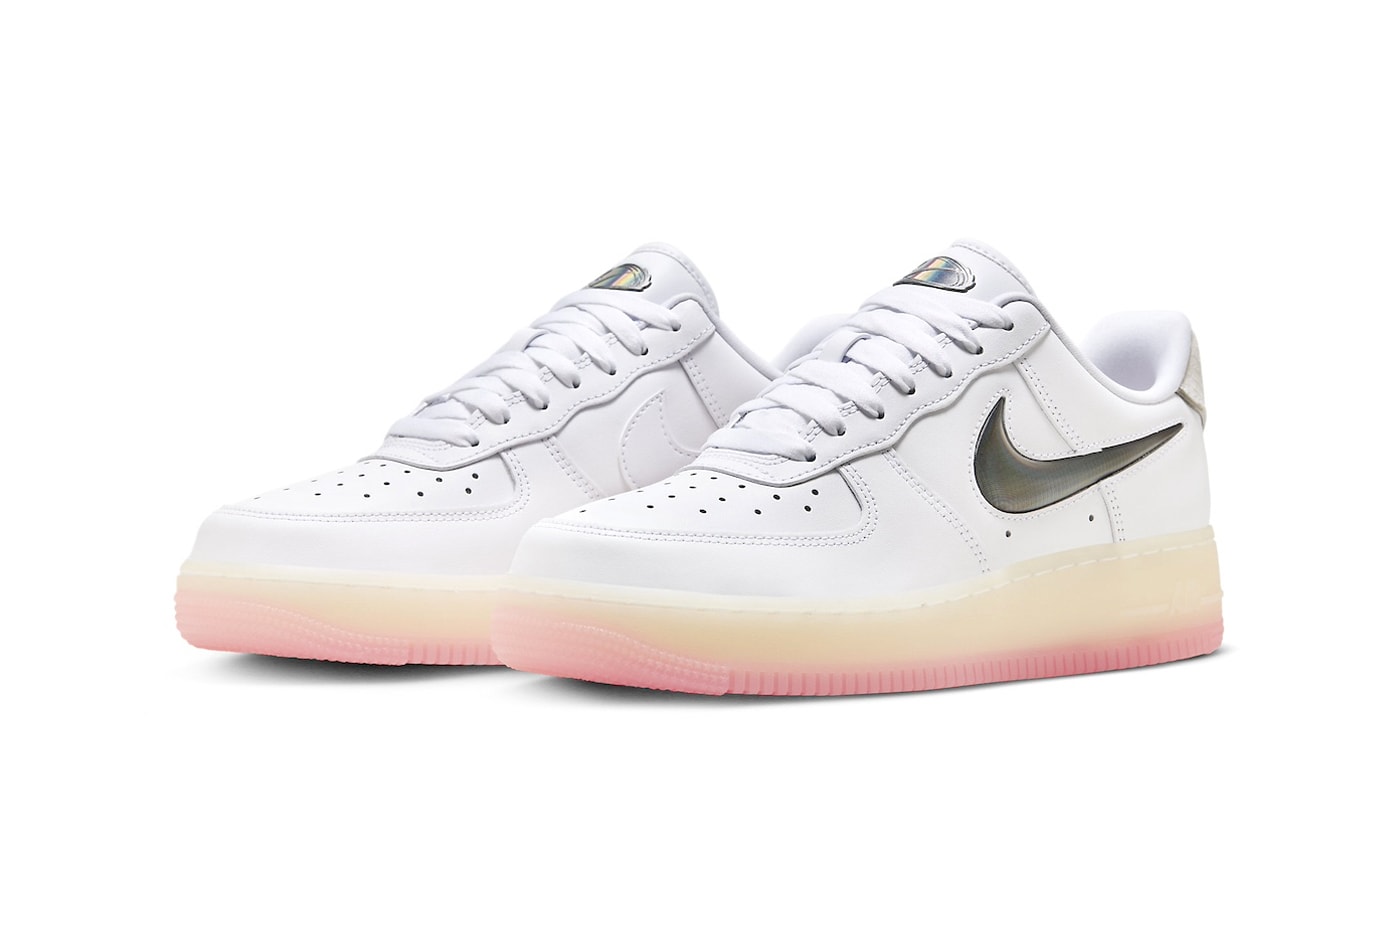 Nike Air Force 1 Low Chinese New Year FZ5741-191 White/Photon Dust-Pale Vanilla-Pink spring 2024 year of the dragon celebration 